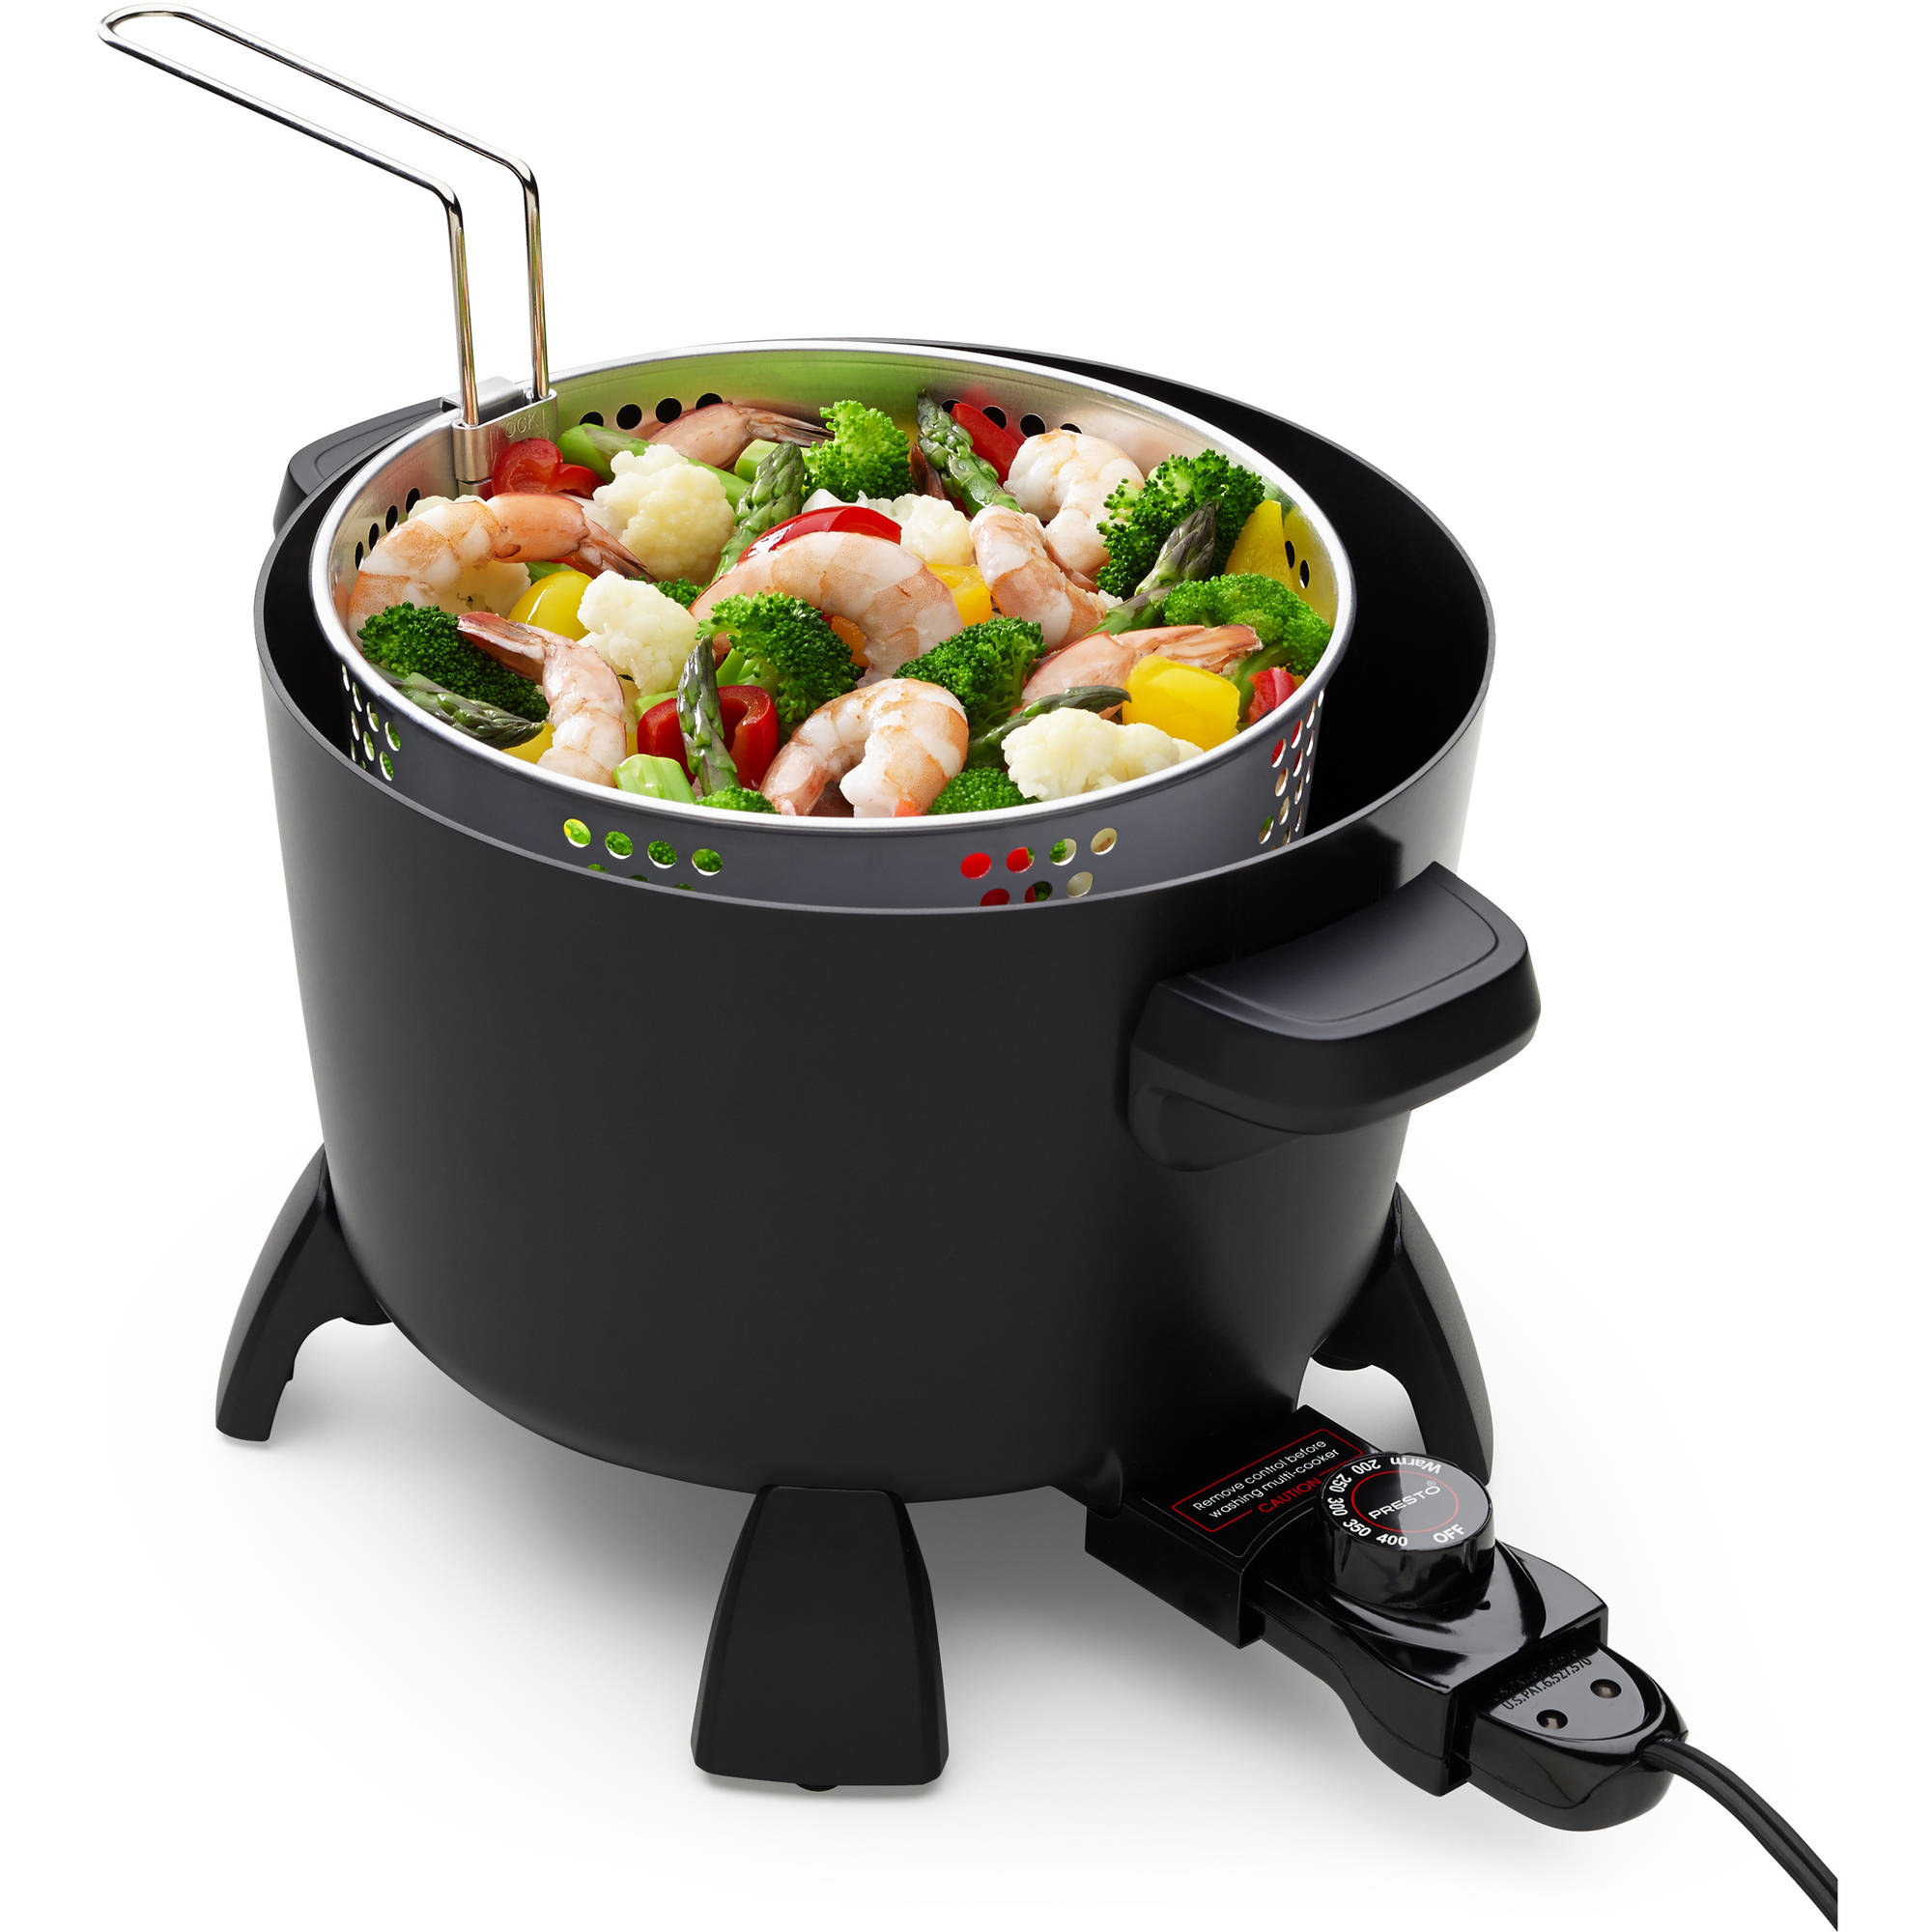 a black multi use deep fryer and steamer